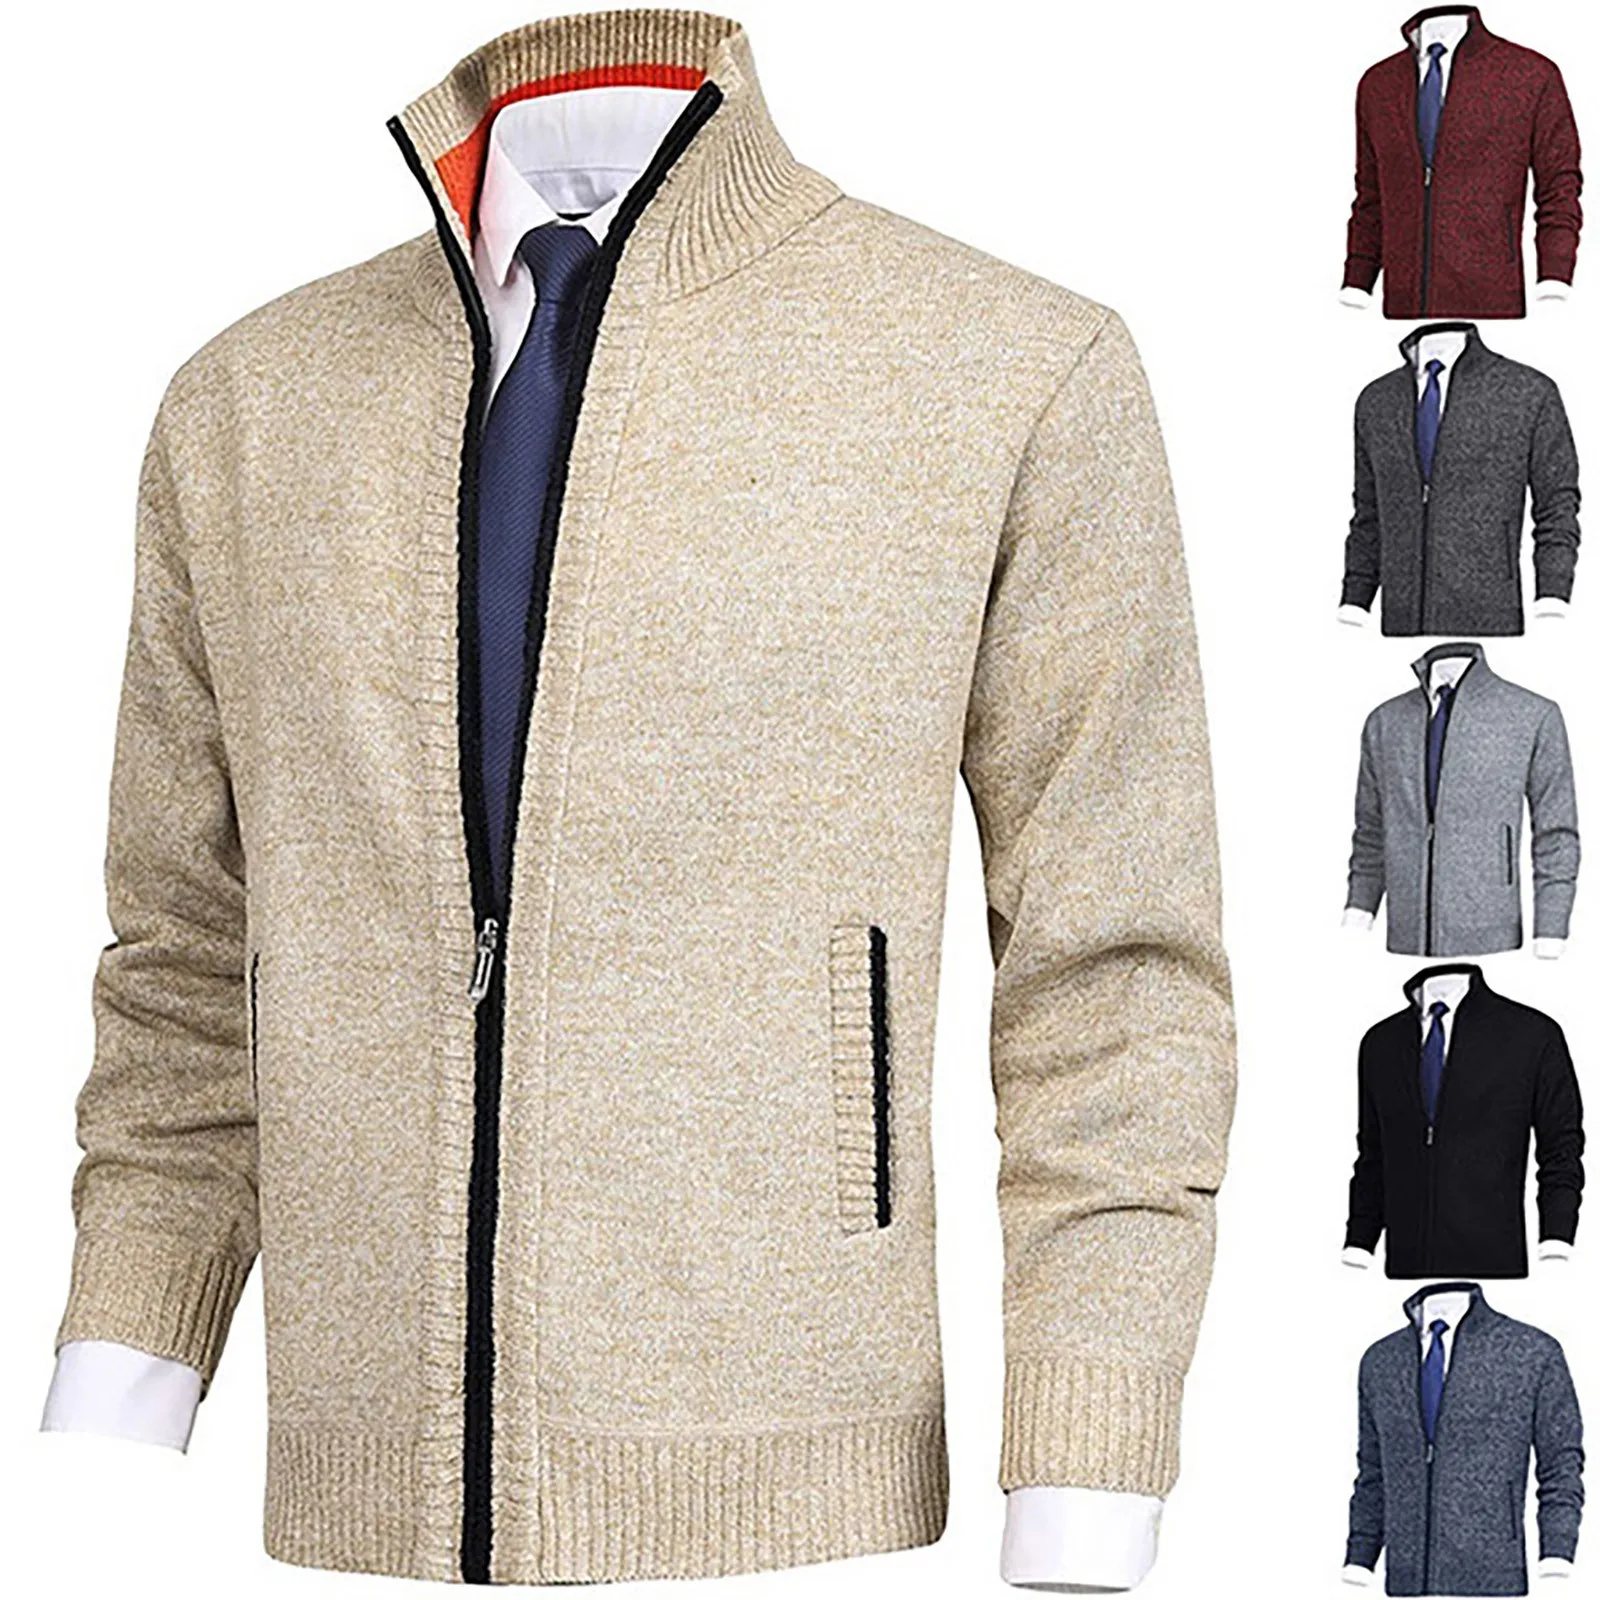 

High Quality Men Jackets Autumn And Winter Fashion Loose Warm Jacket Sweater Stand Collar Knitting Coat Men's Clothing Chaquetas